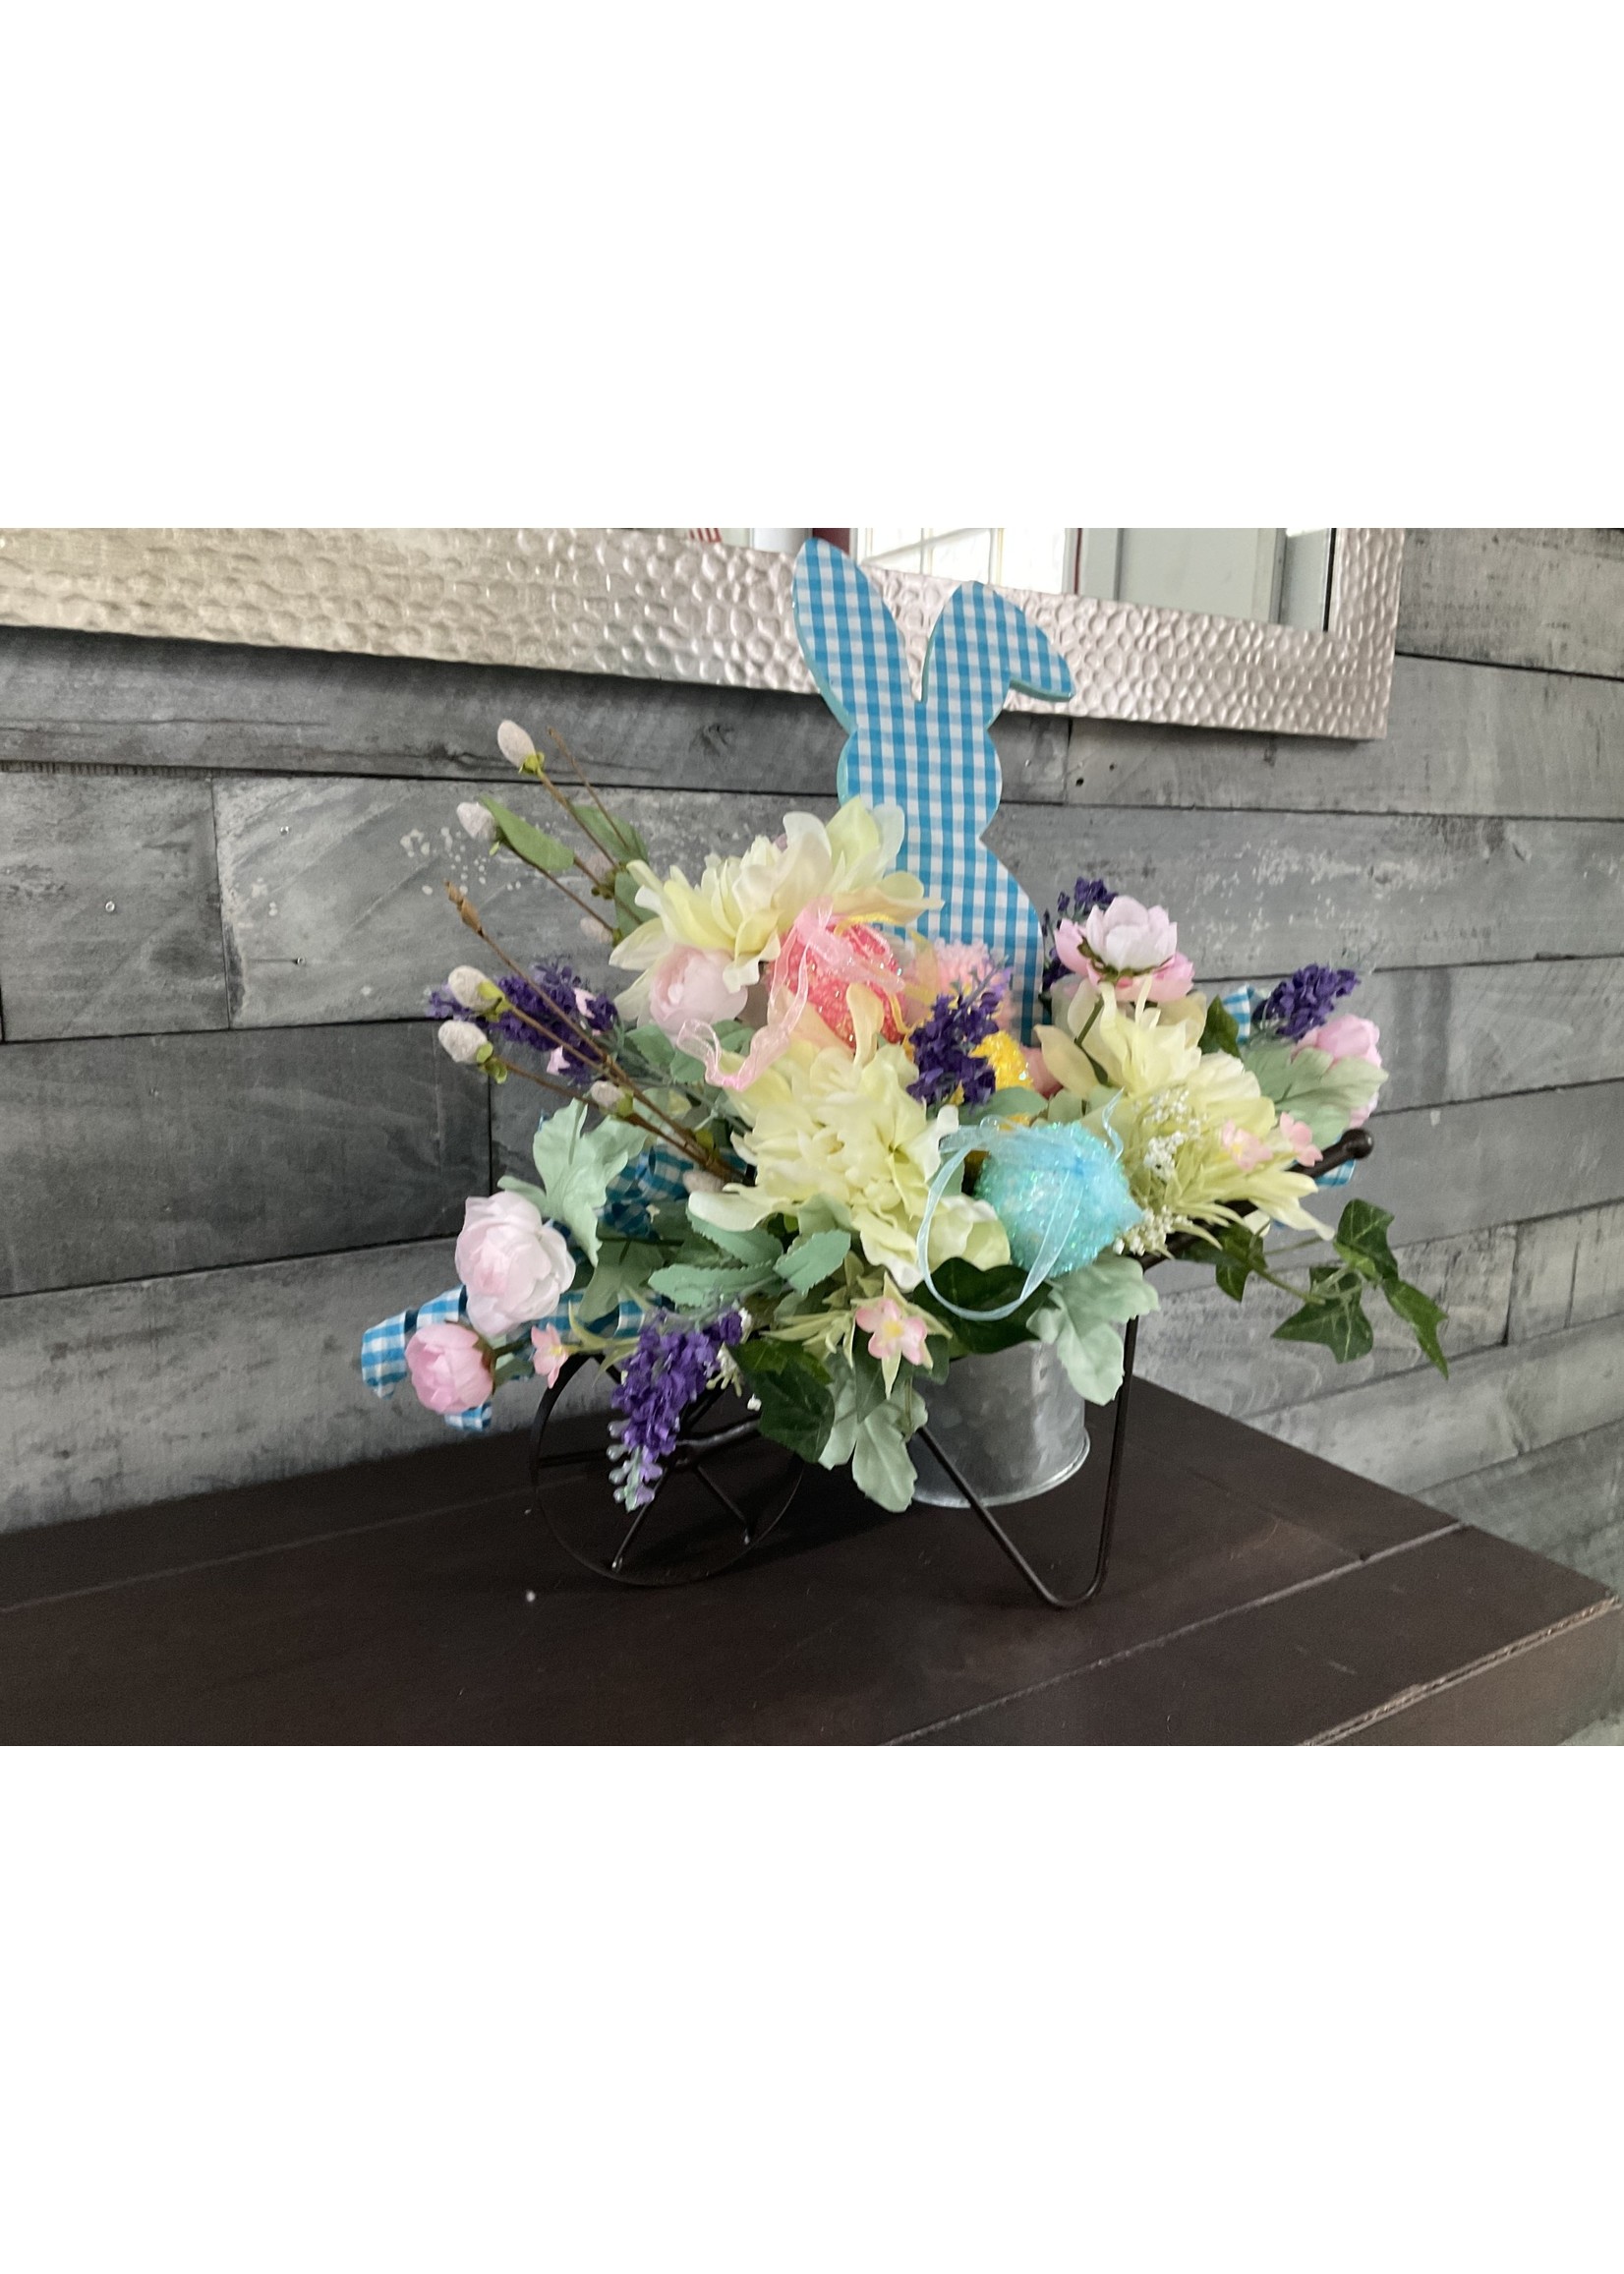 My New Favorite Thing Centerpiece Easter Wheelbarrow Blue Gingham Bunny and Flowers